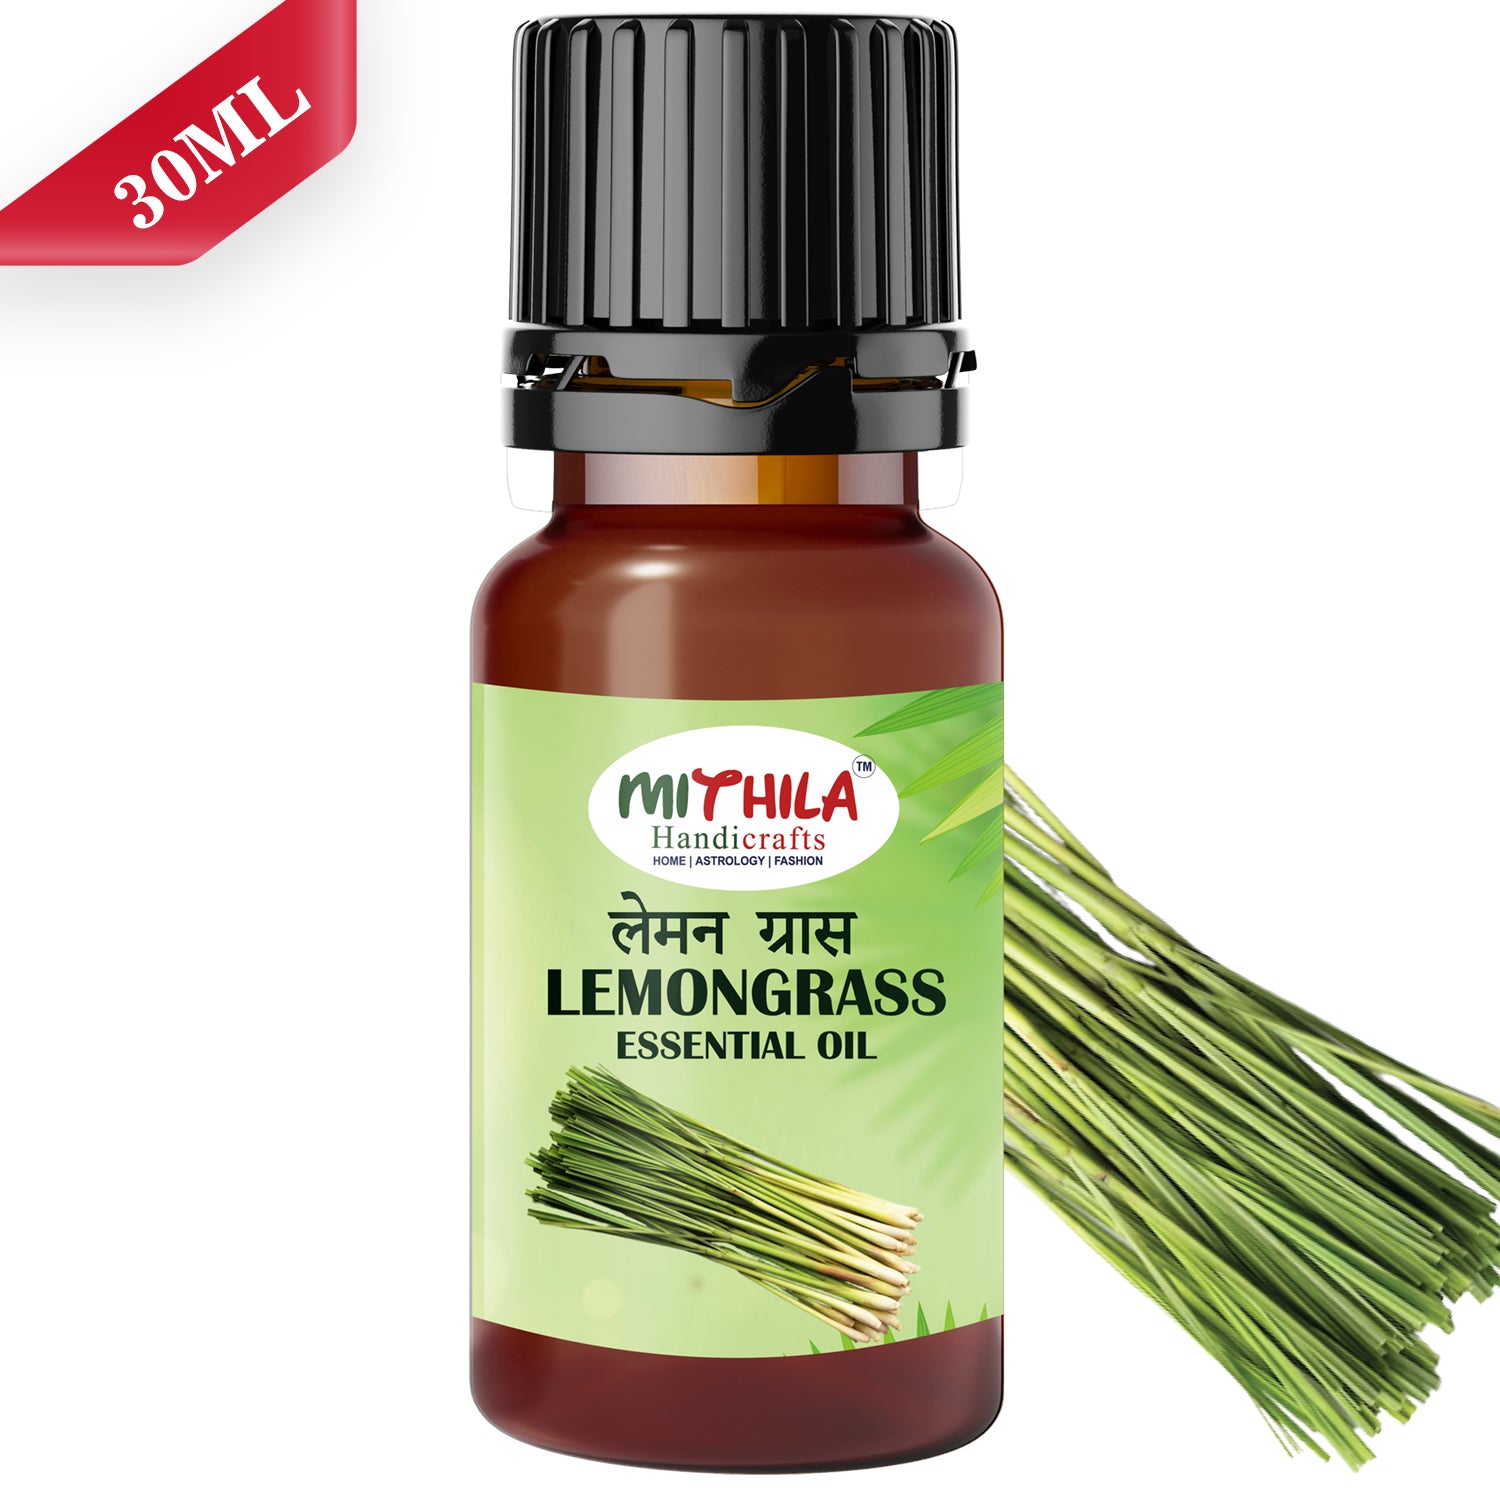 LemonGrass Essential Oil For Skin, Hair Care, Home Fragrance, Aroma Therapy 30ml